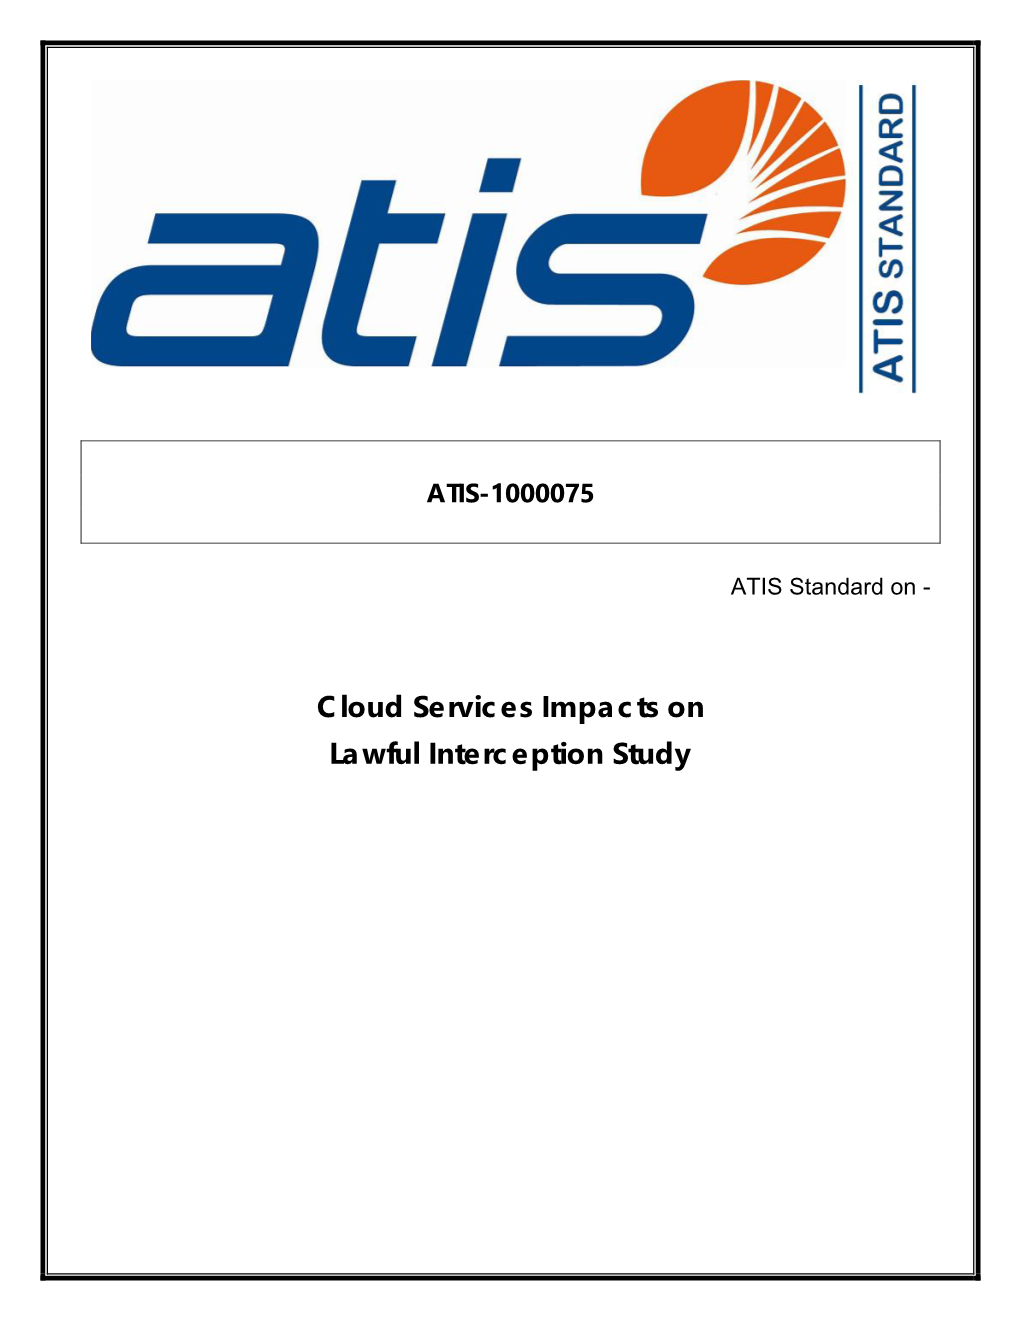 Cloud Services Impacts on Lawful Interception Study